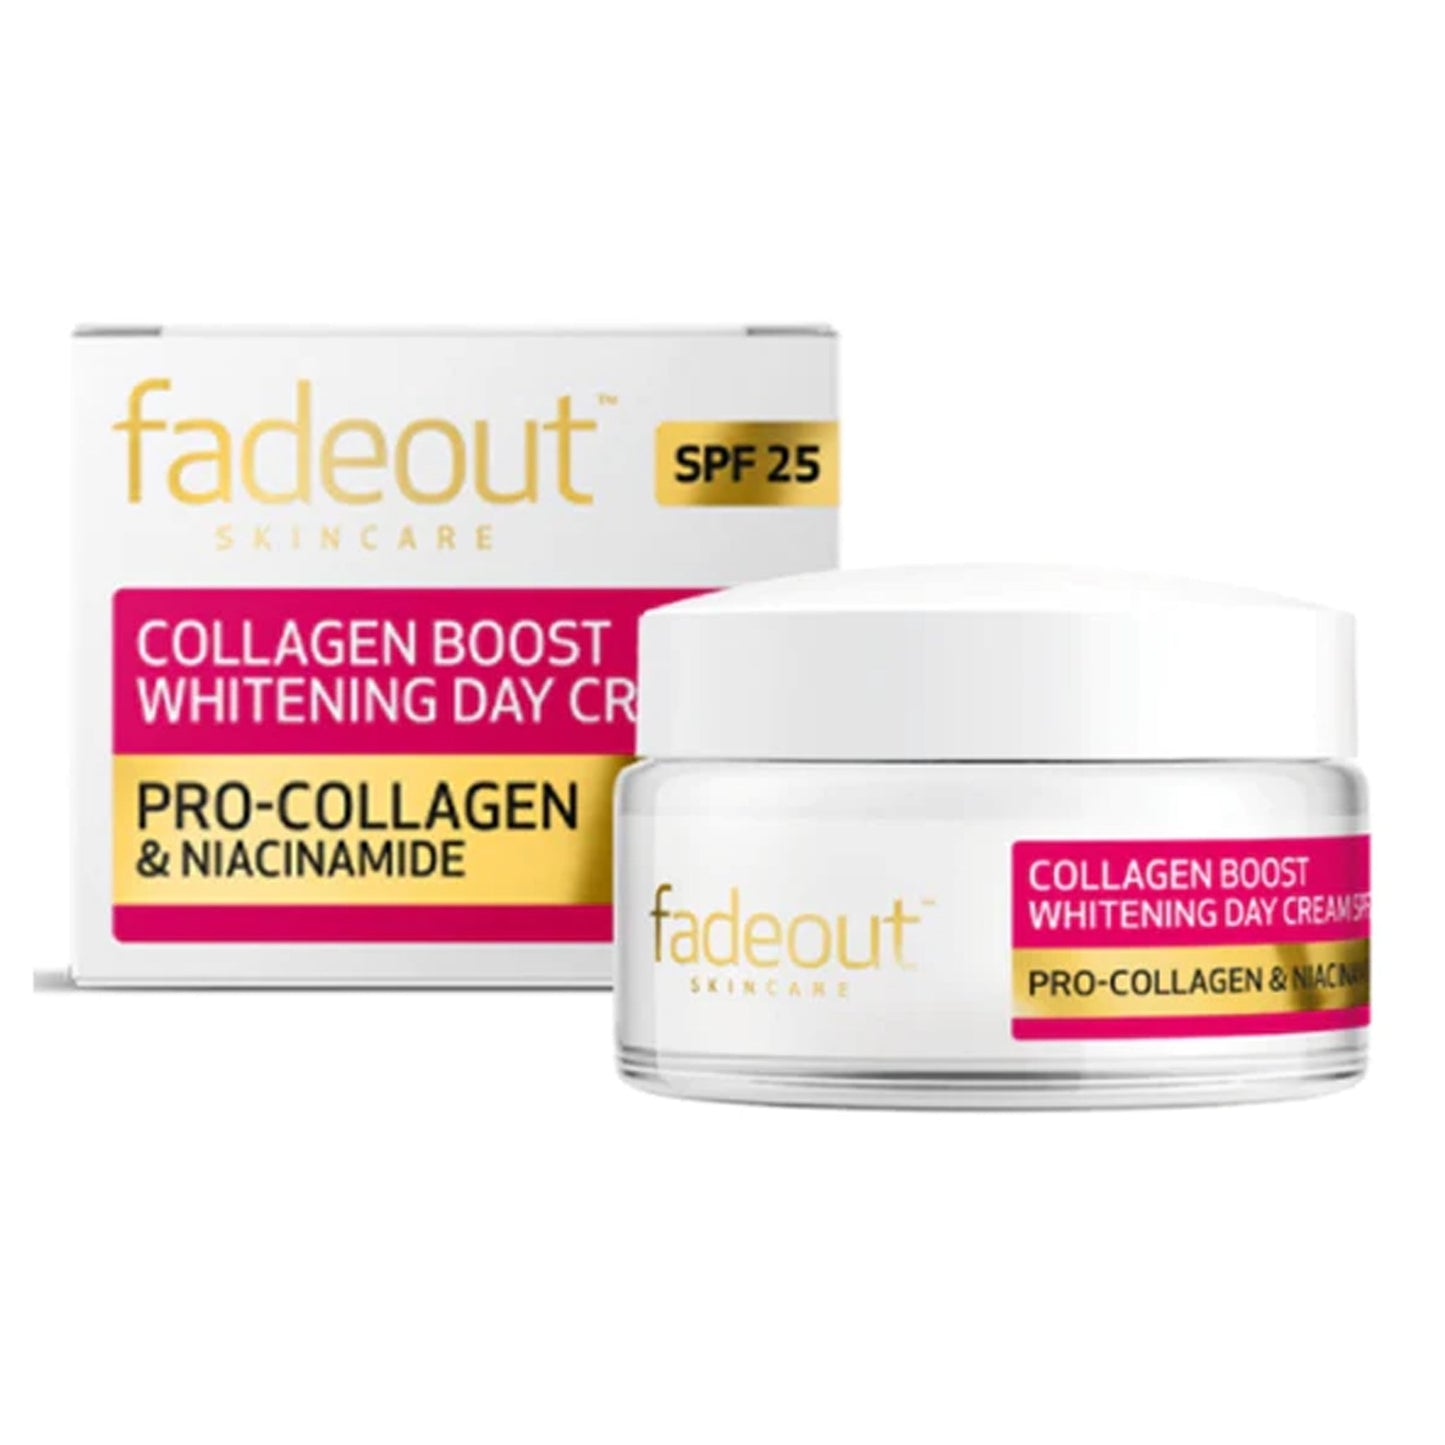 FADEOUT - COLLAGEN BOOST WHITENING DAY CREAM WITH PRO-COLLAGEN & NIACINAMIDE SPF 25 - 50ML